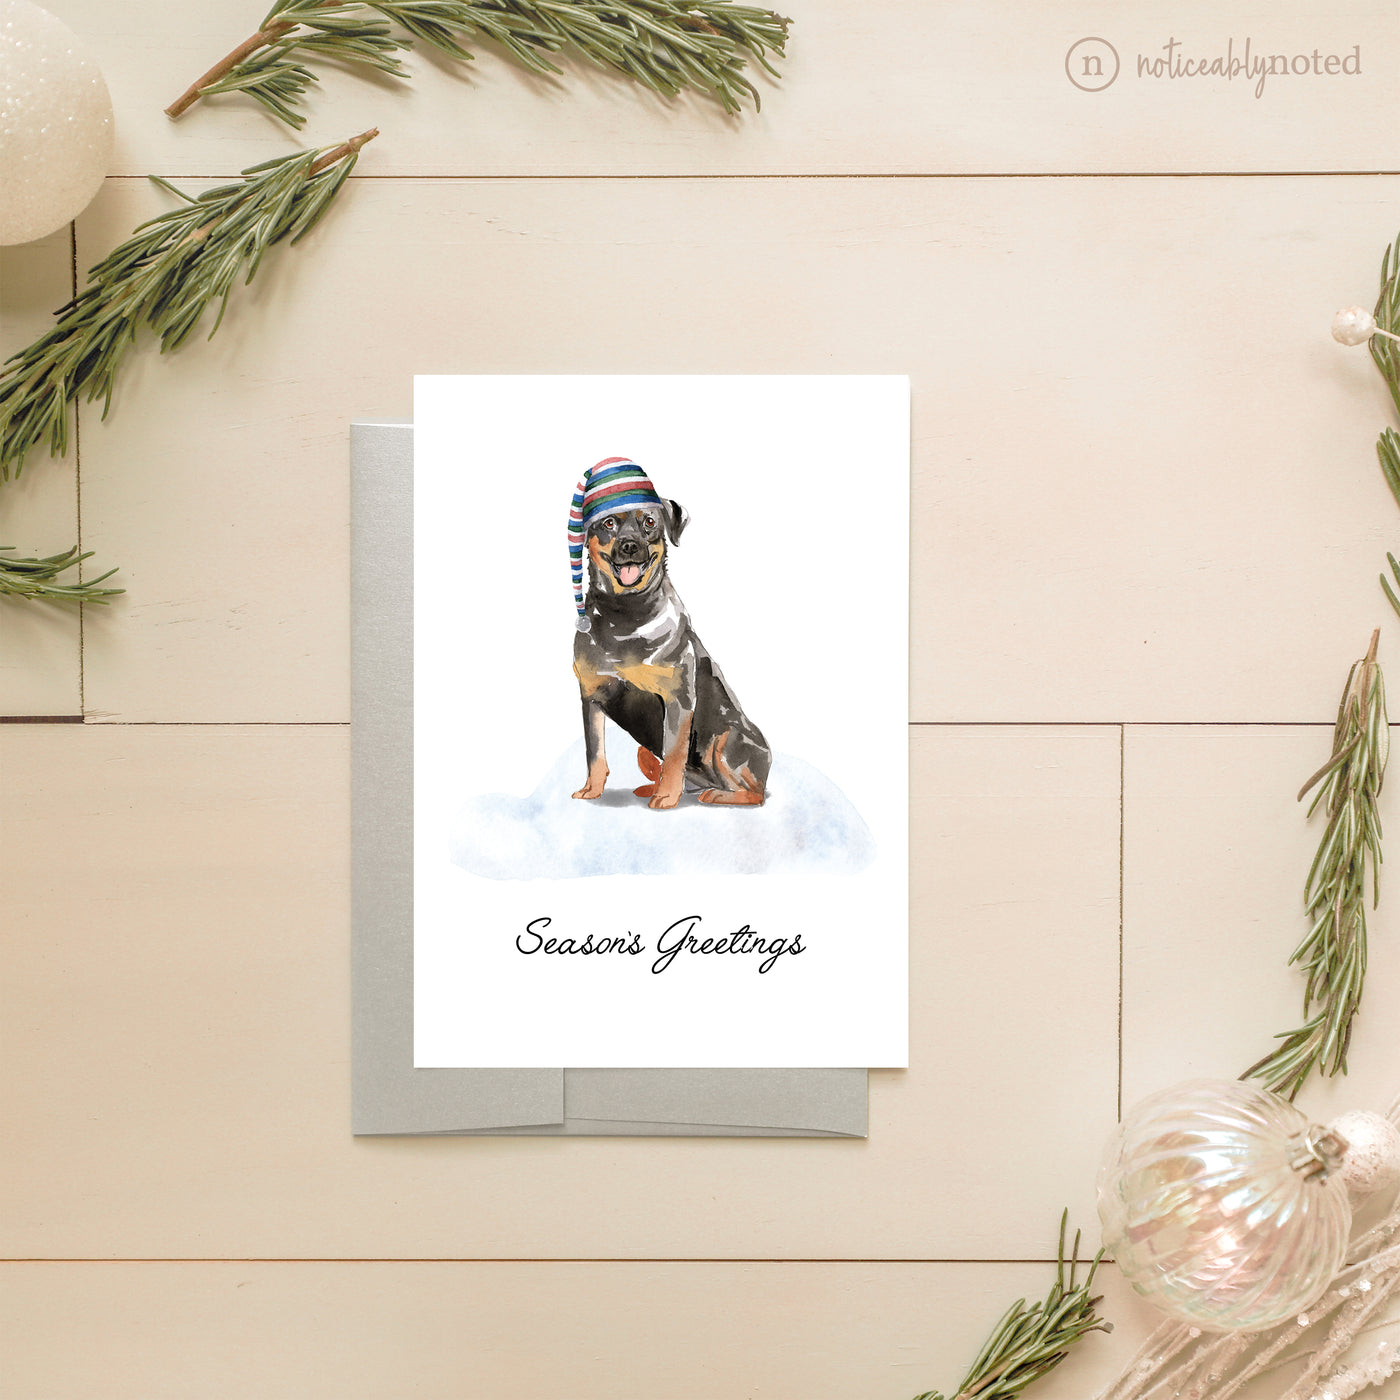 Rottweiler Dog Holiday Greeting Cards | Noticeably Noted